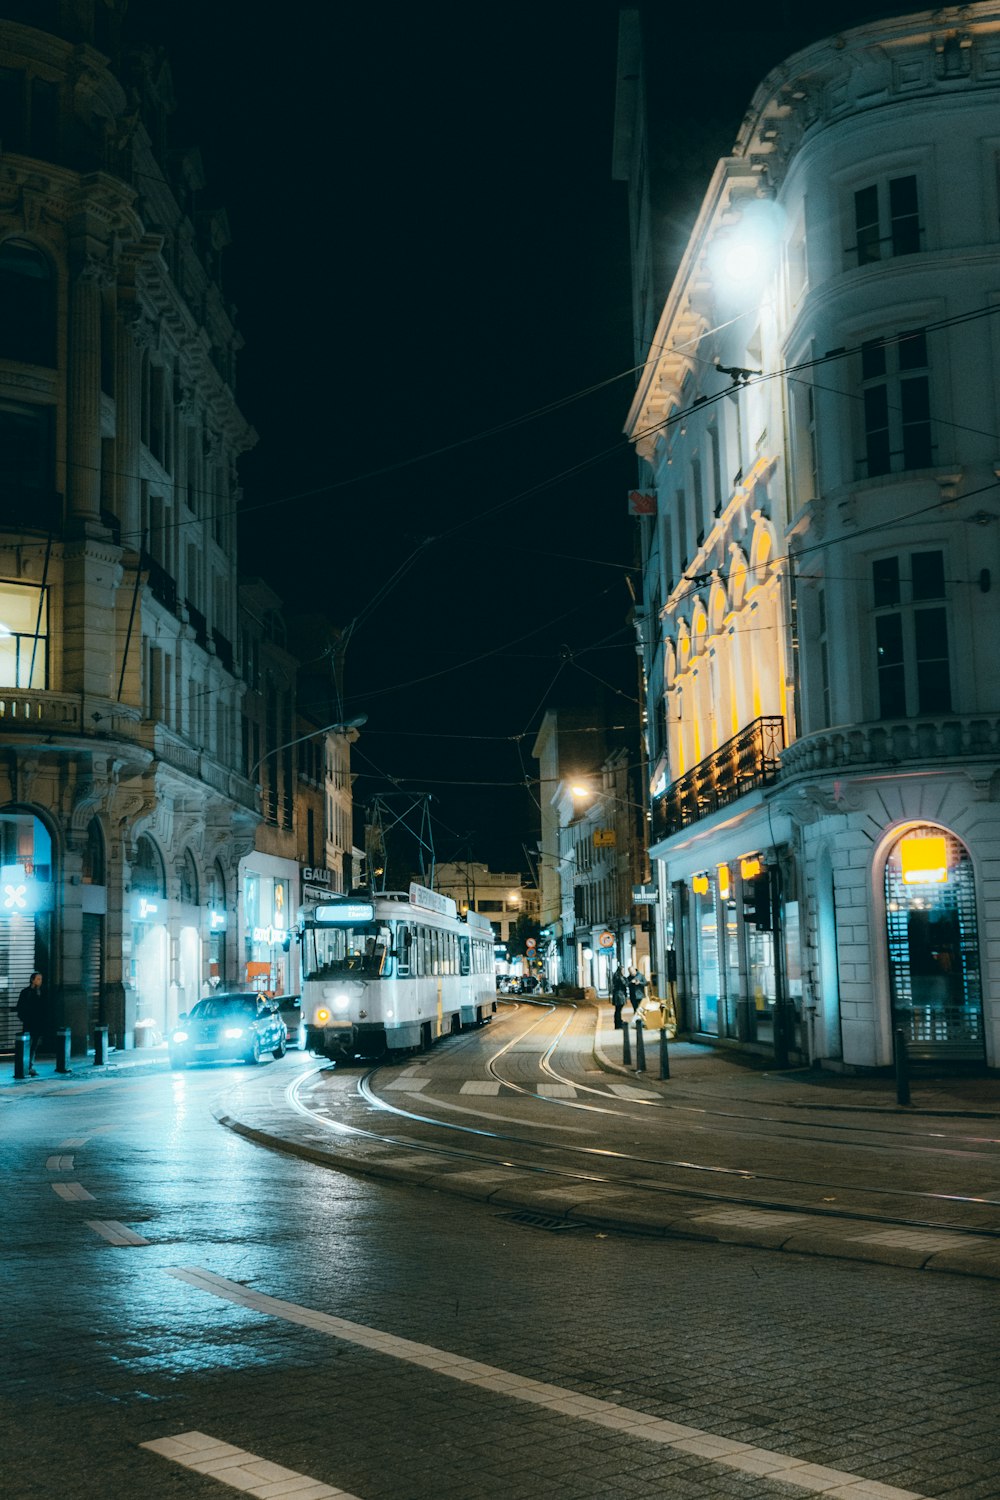 a city street at night with a bus on the road